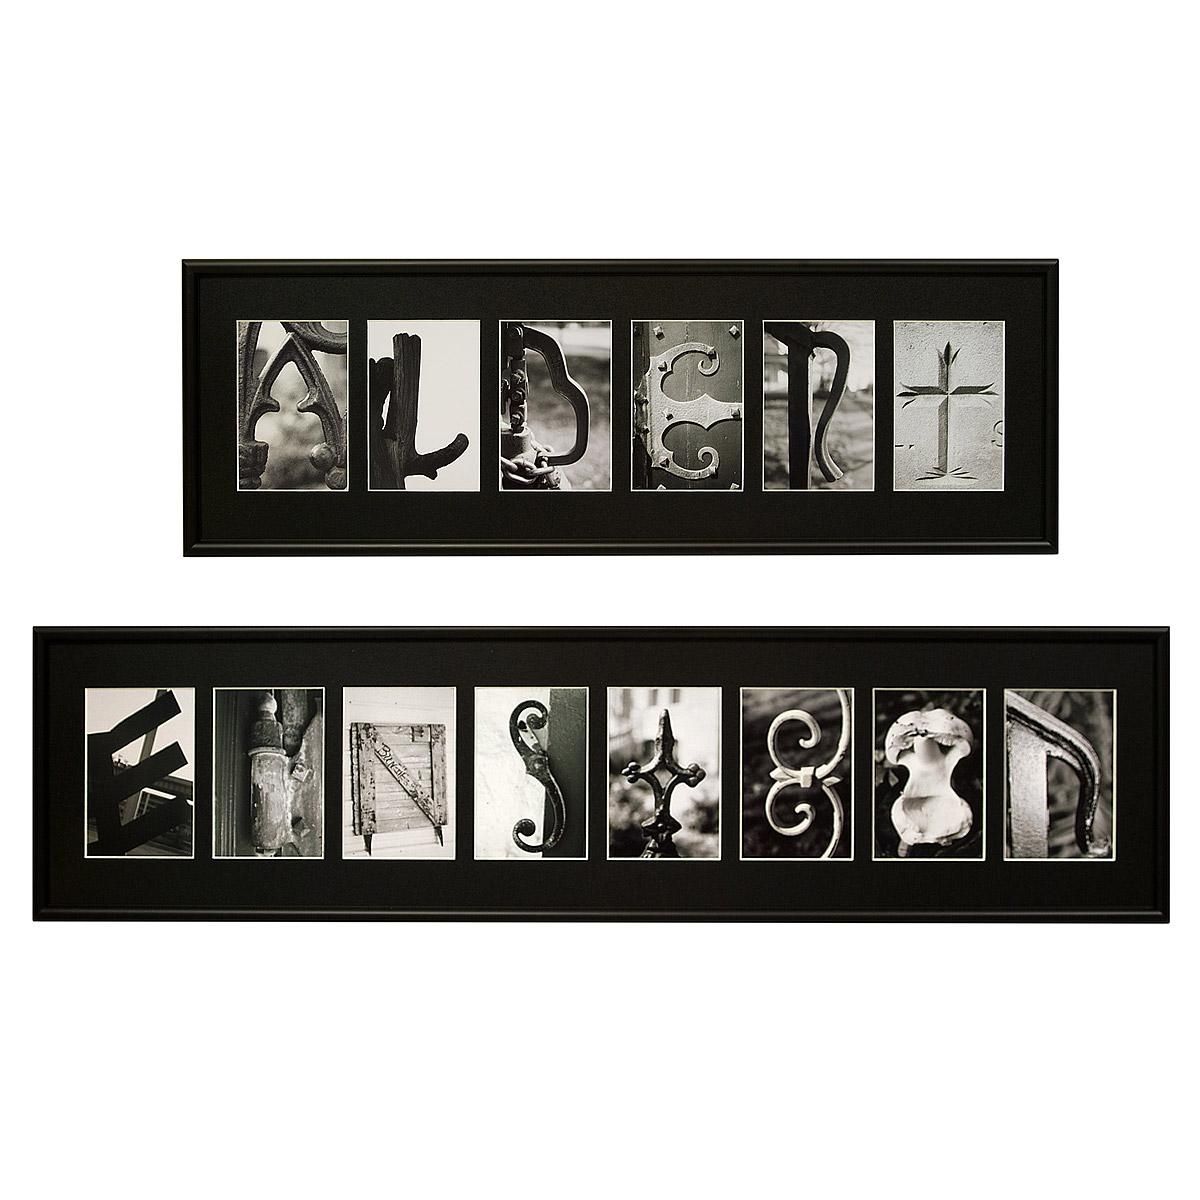 Personalized Photo Art | Unique, Customizable Home Decor Gift Inside Personalized Wall Art With Names (View 6 of 20)